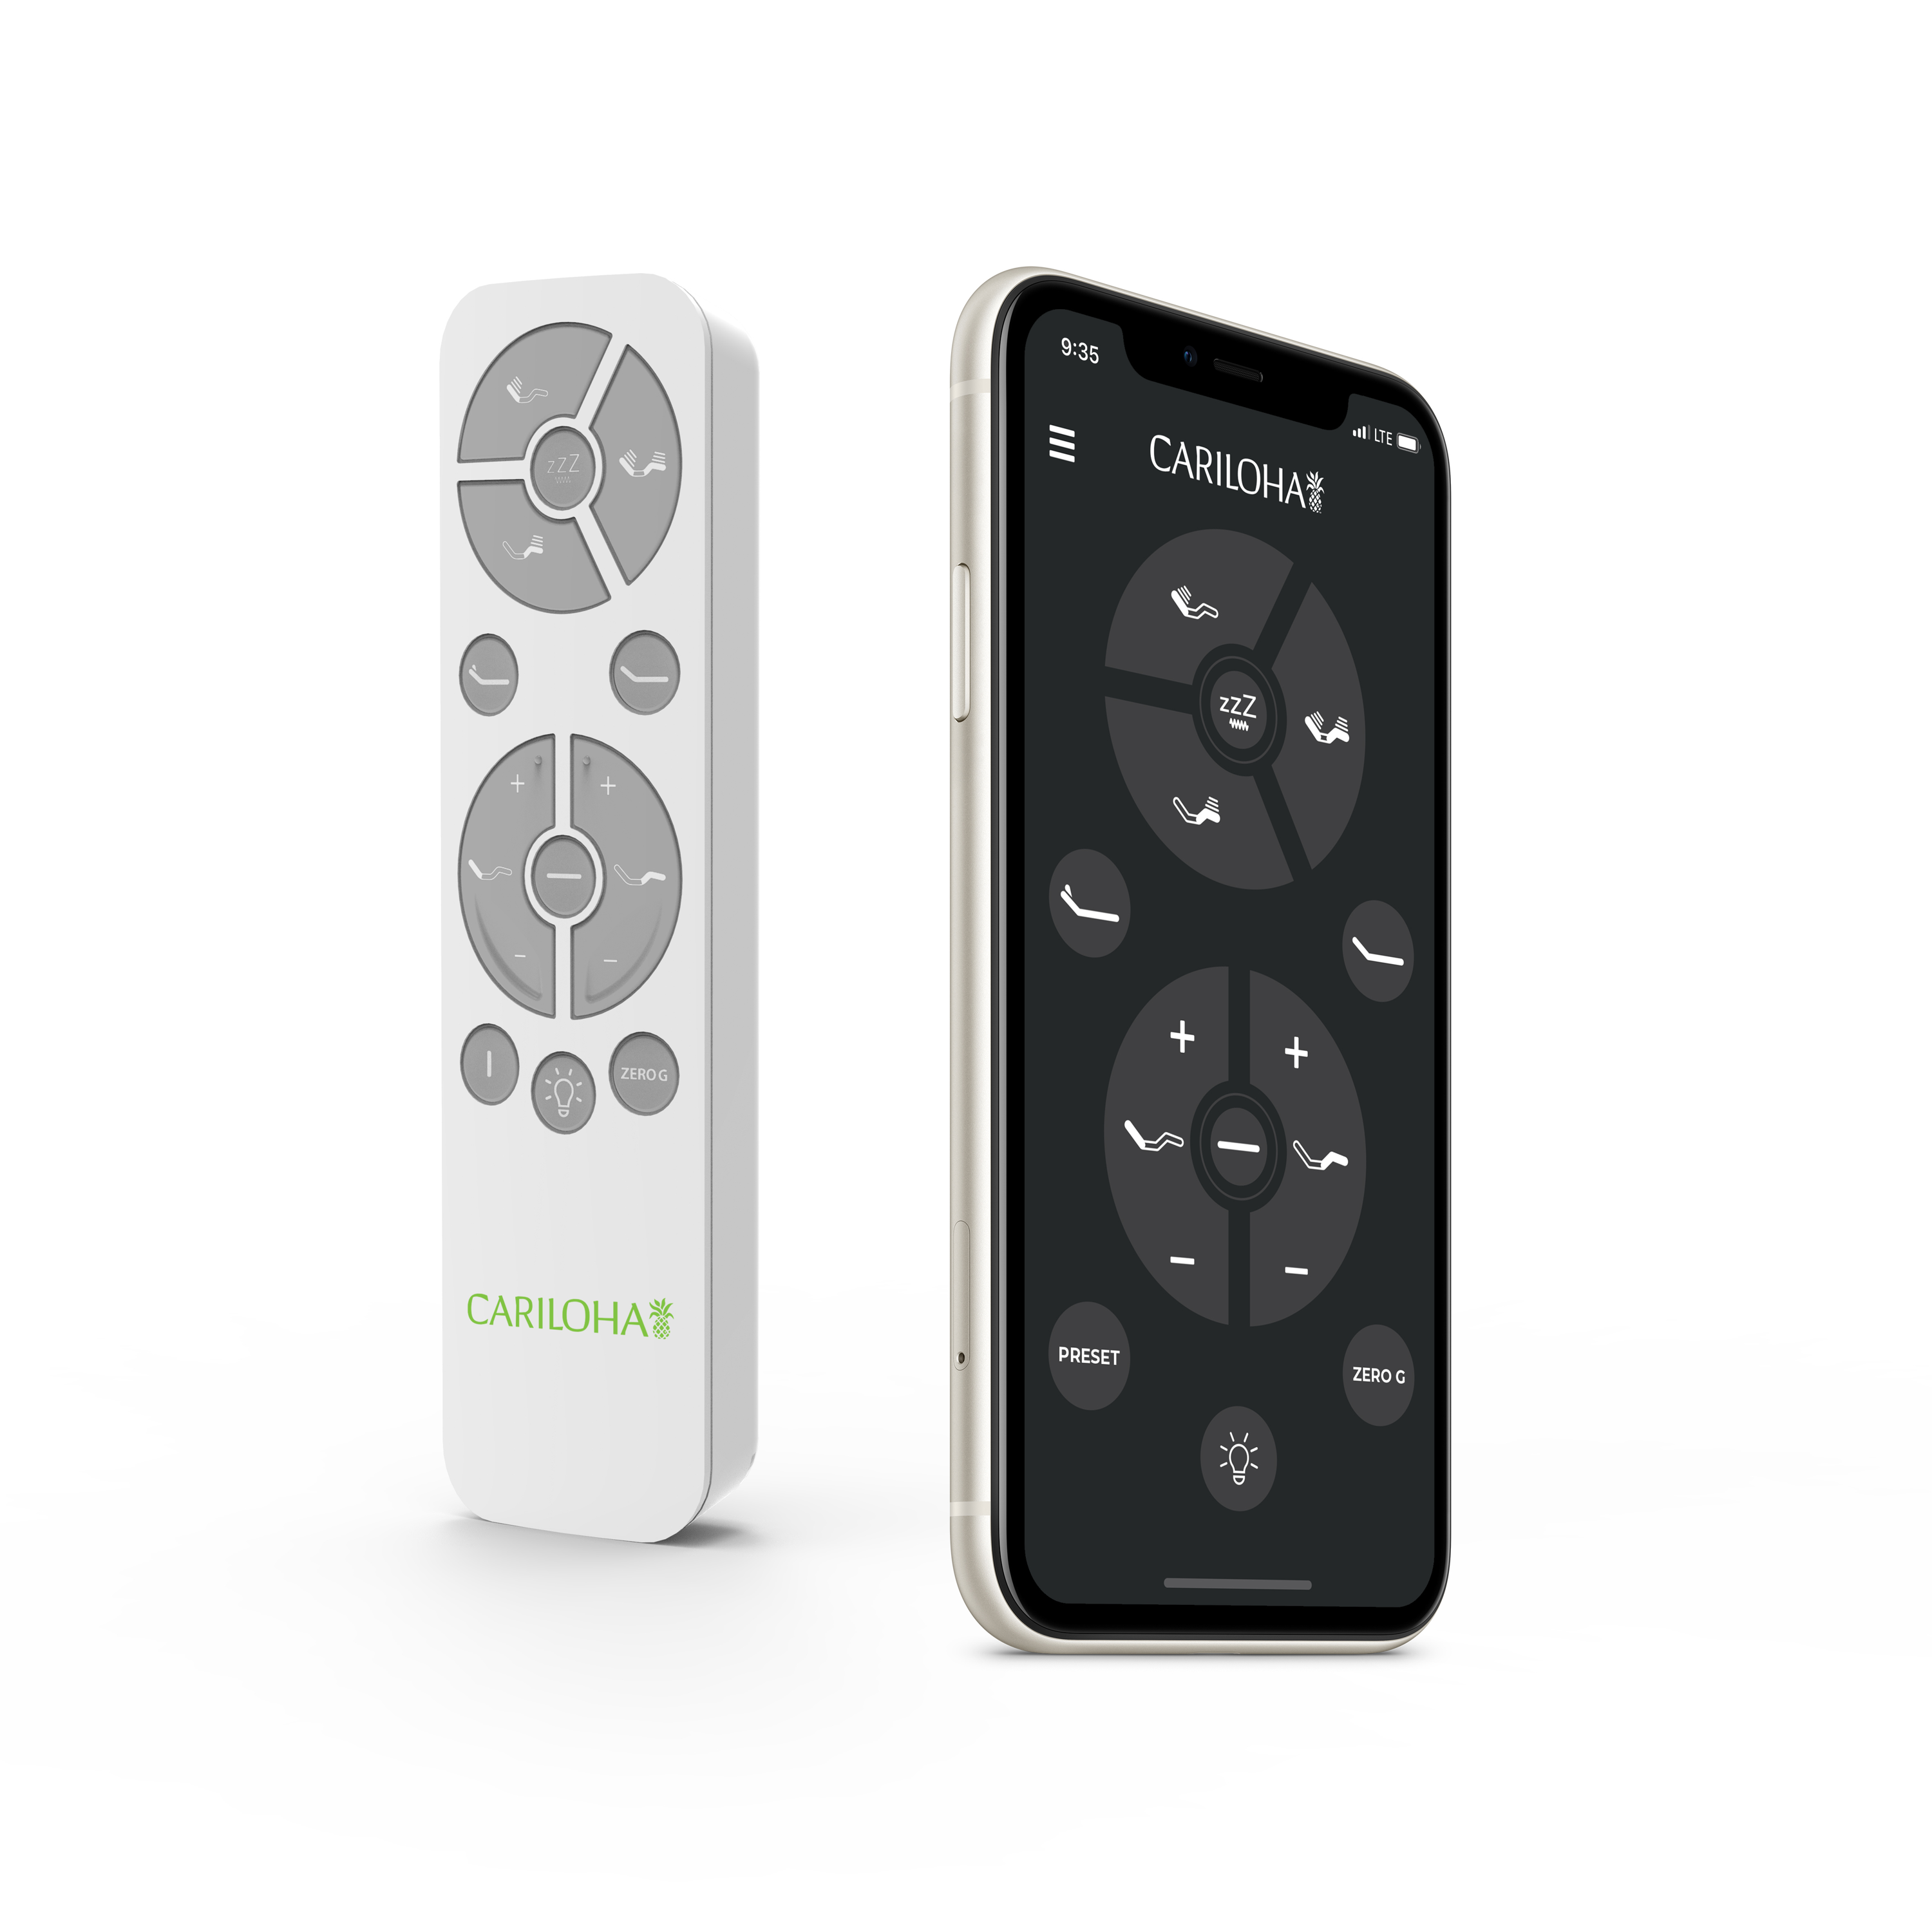 rendered image of remote control and app